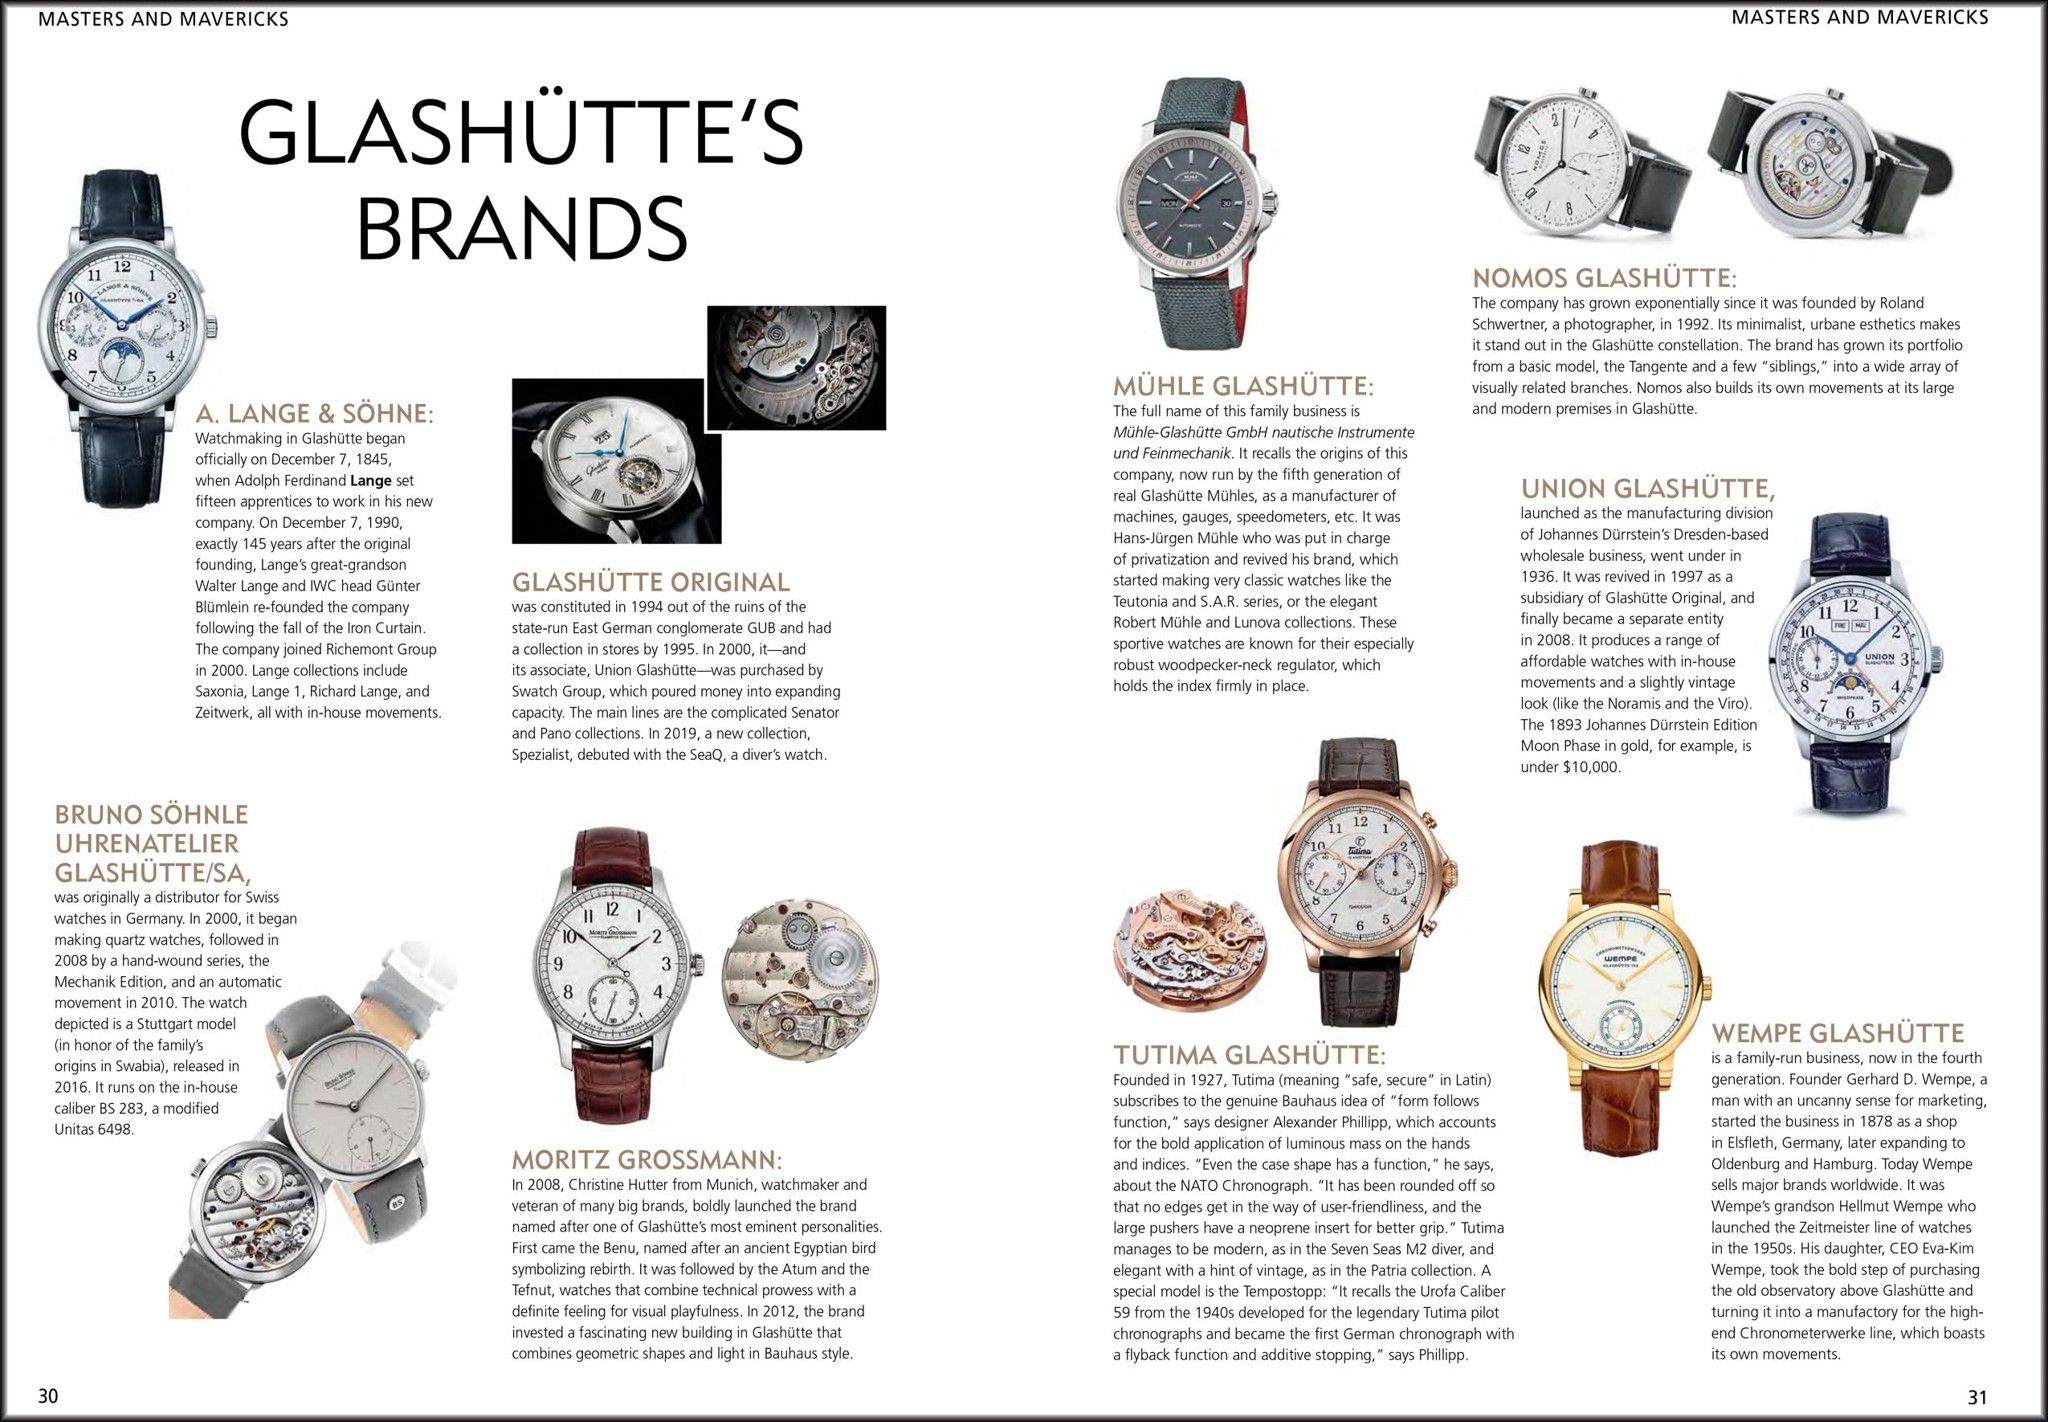  WRISTWATCH ANNUAL 2022 - CATALOGUE OF PRODUCERS, PRICES, MODELS & SPECIFICATIONS 